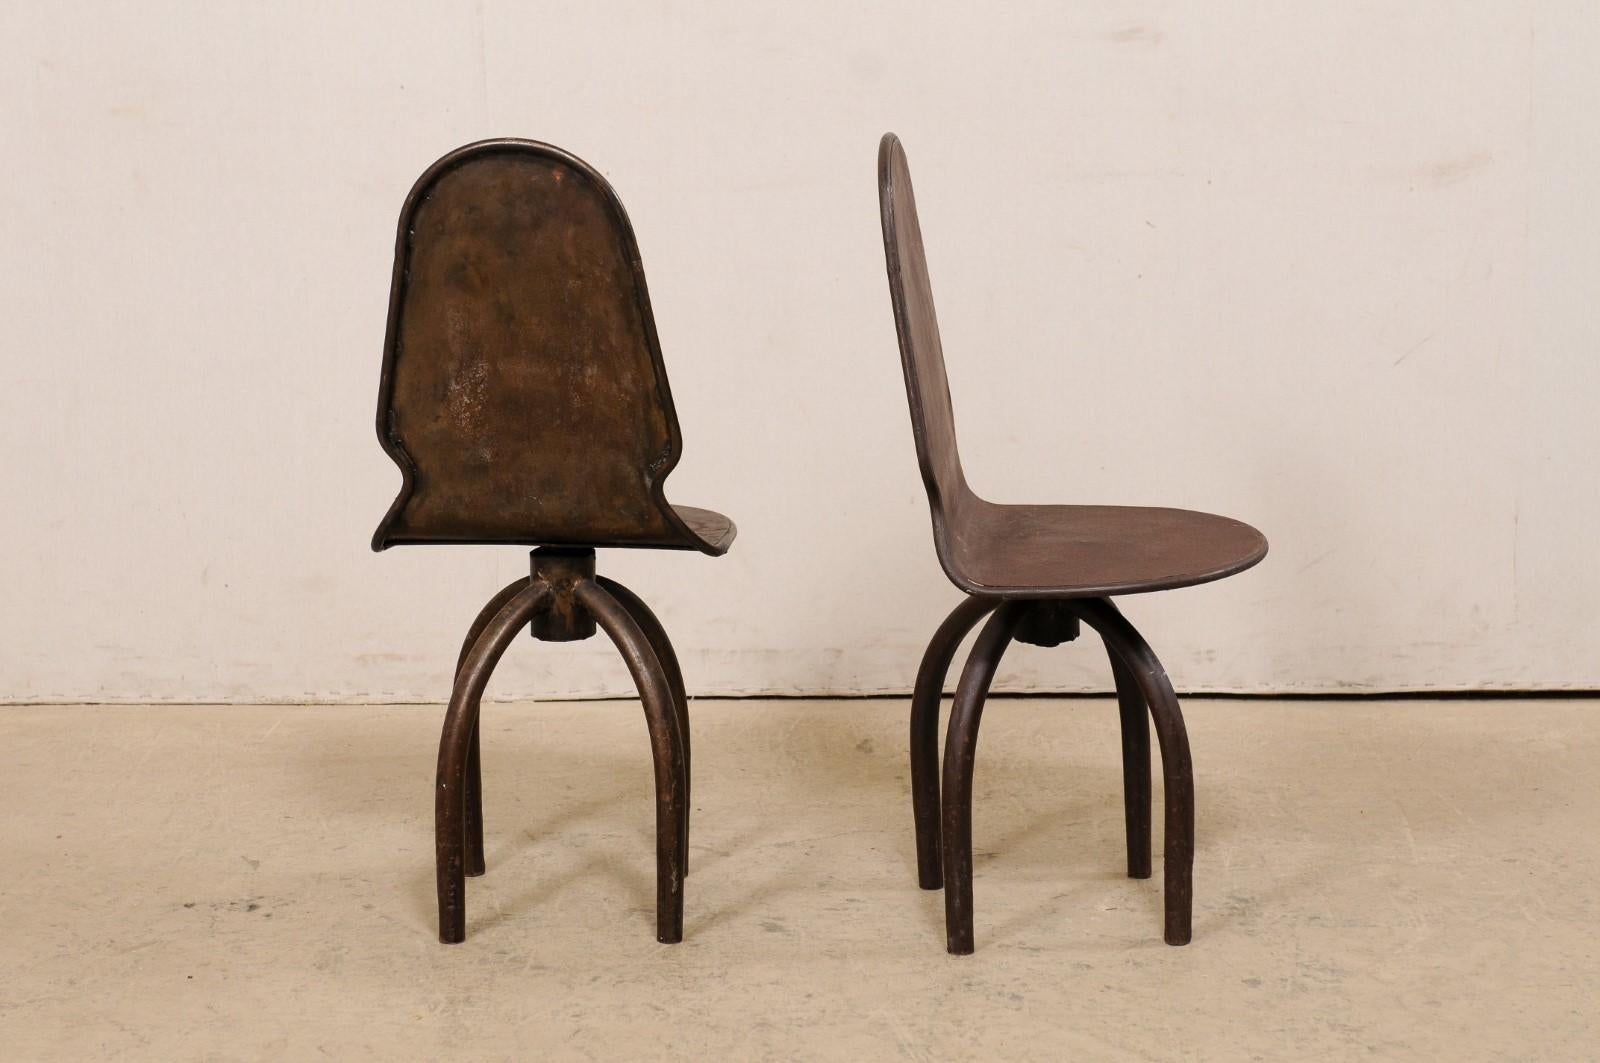 Spanish Pair of Iron Swivel Chairs on Spider-Style Legs, Industrial-Chic For Sale 3